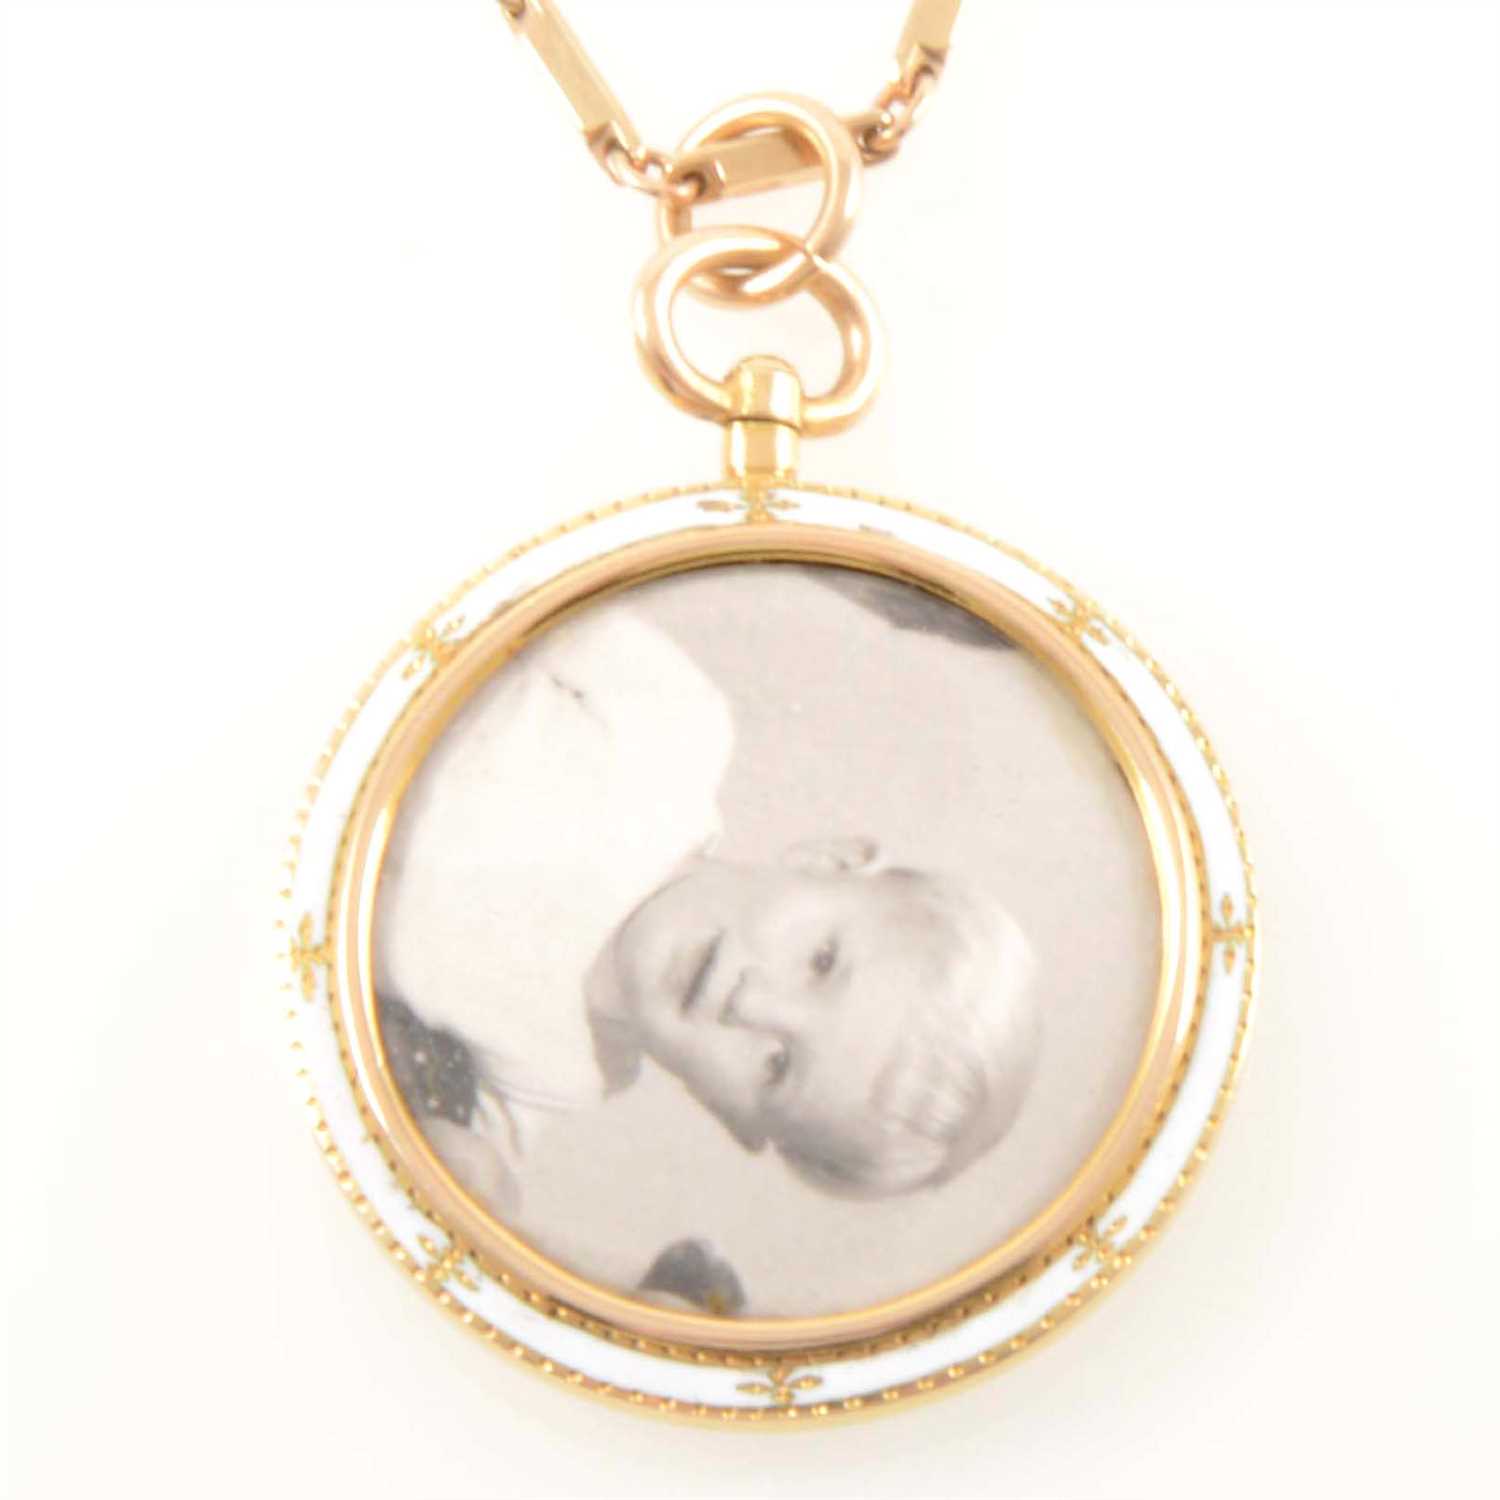 Lot 224 - An enamel photo frame pendant and chain